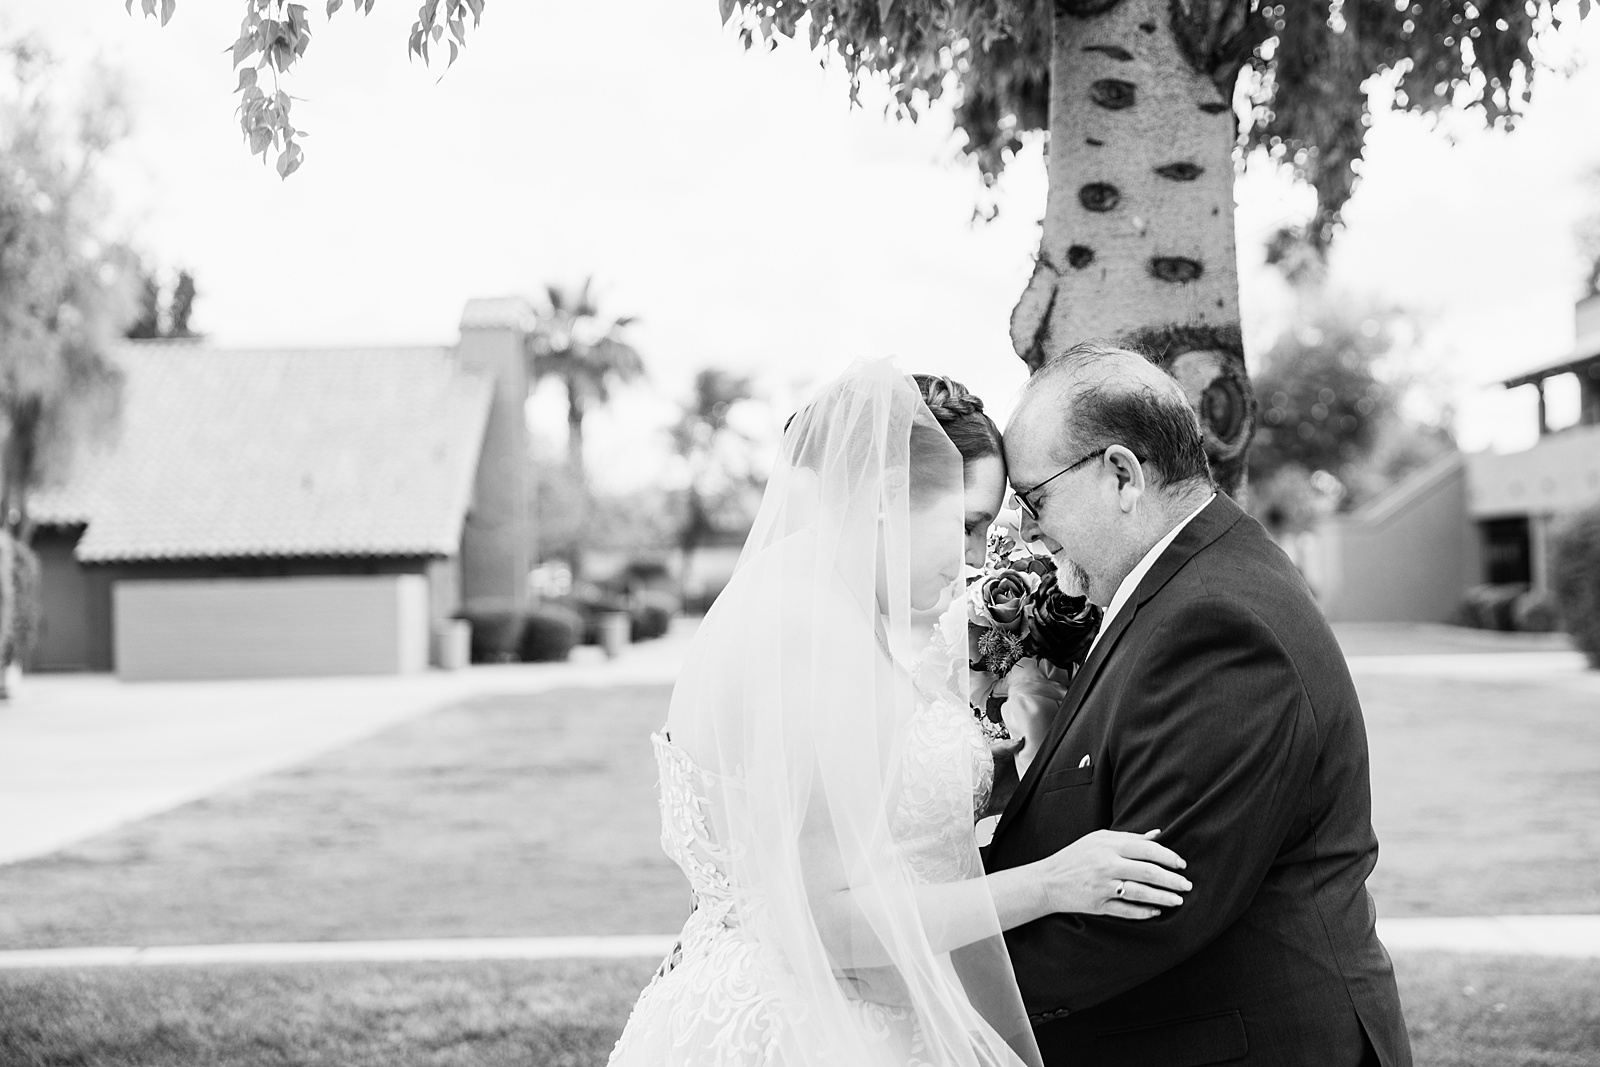 Newlyweds share an intimate moment during their first look at Sun Valley Church by Phoenix wedding photographer PMA Photography.